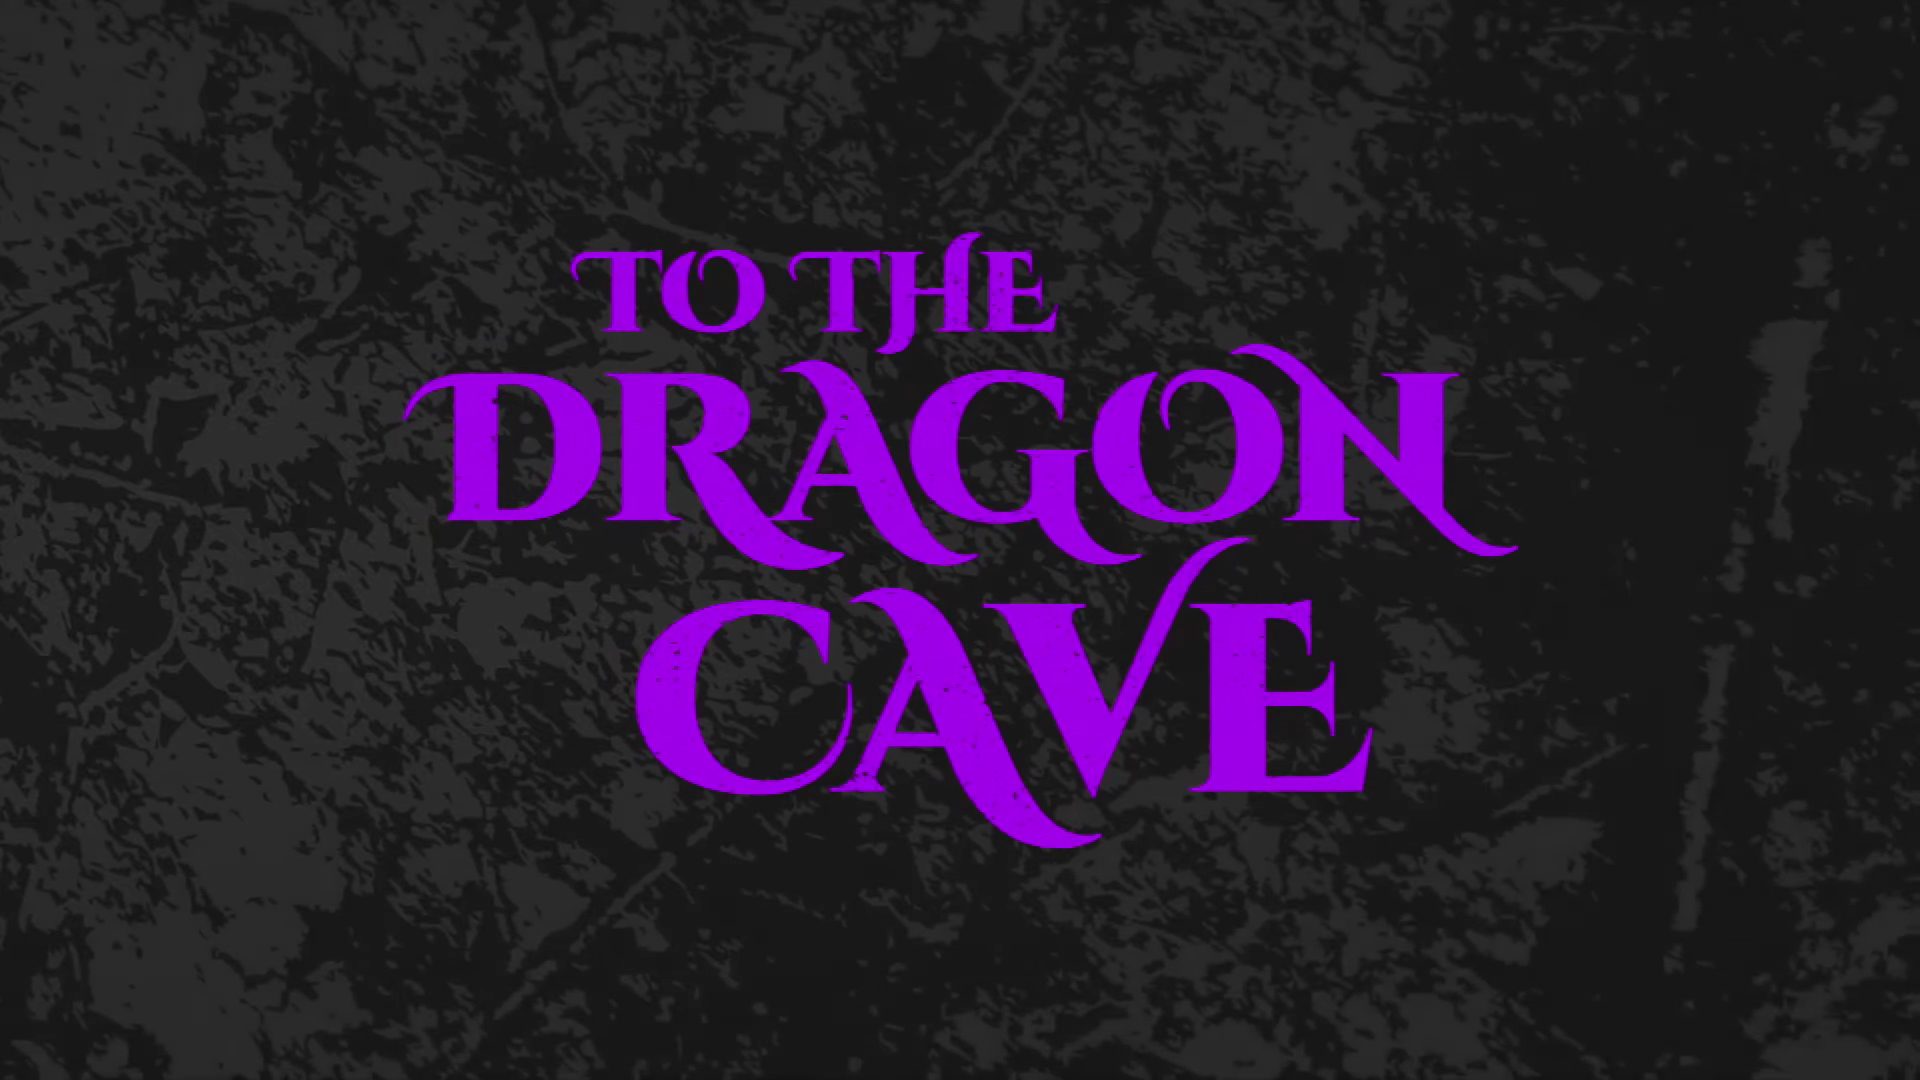 Game image - TO THE DRAGON CAVE